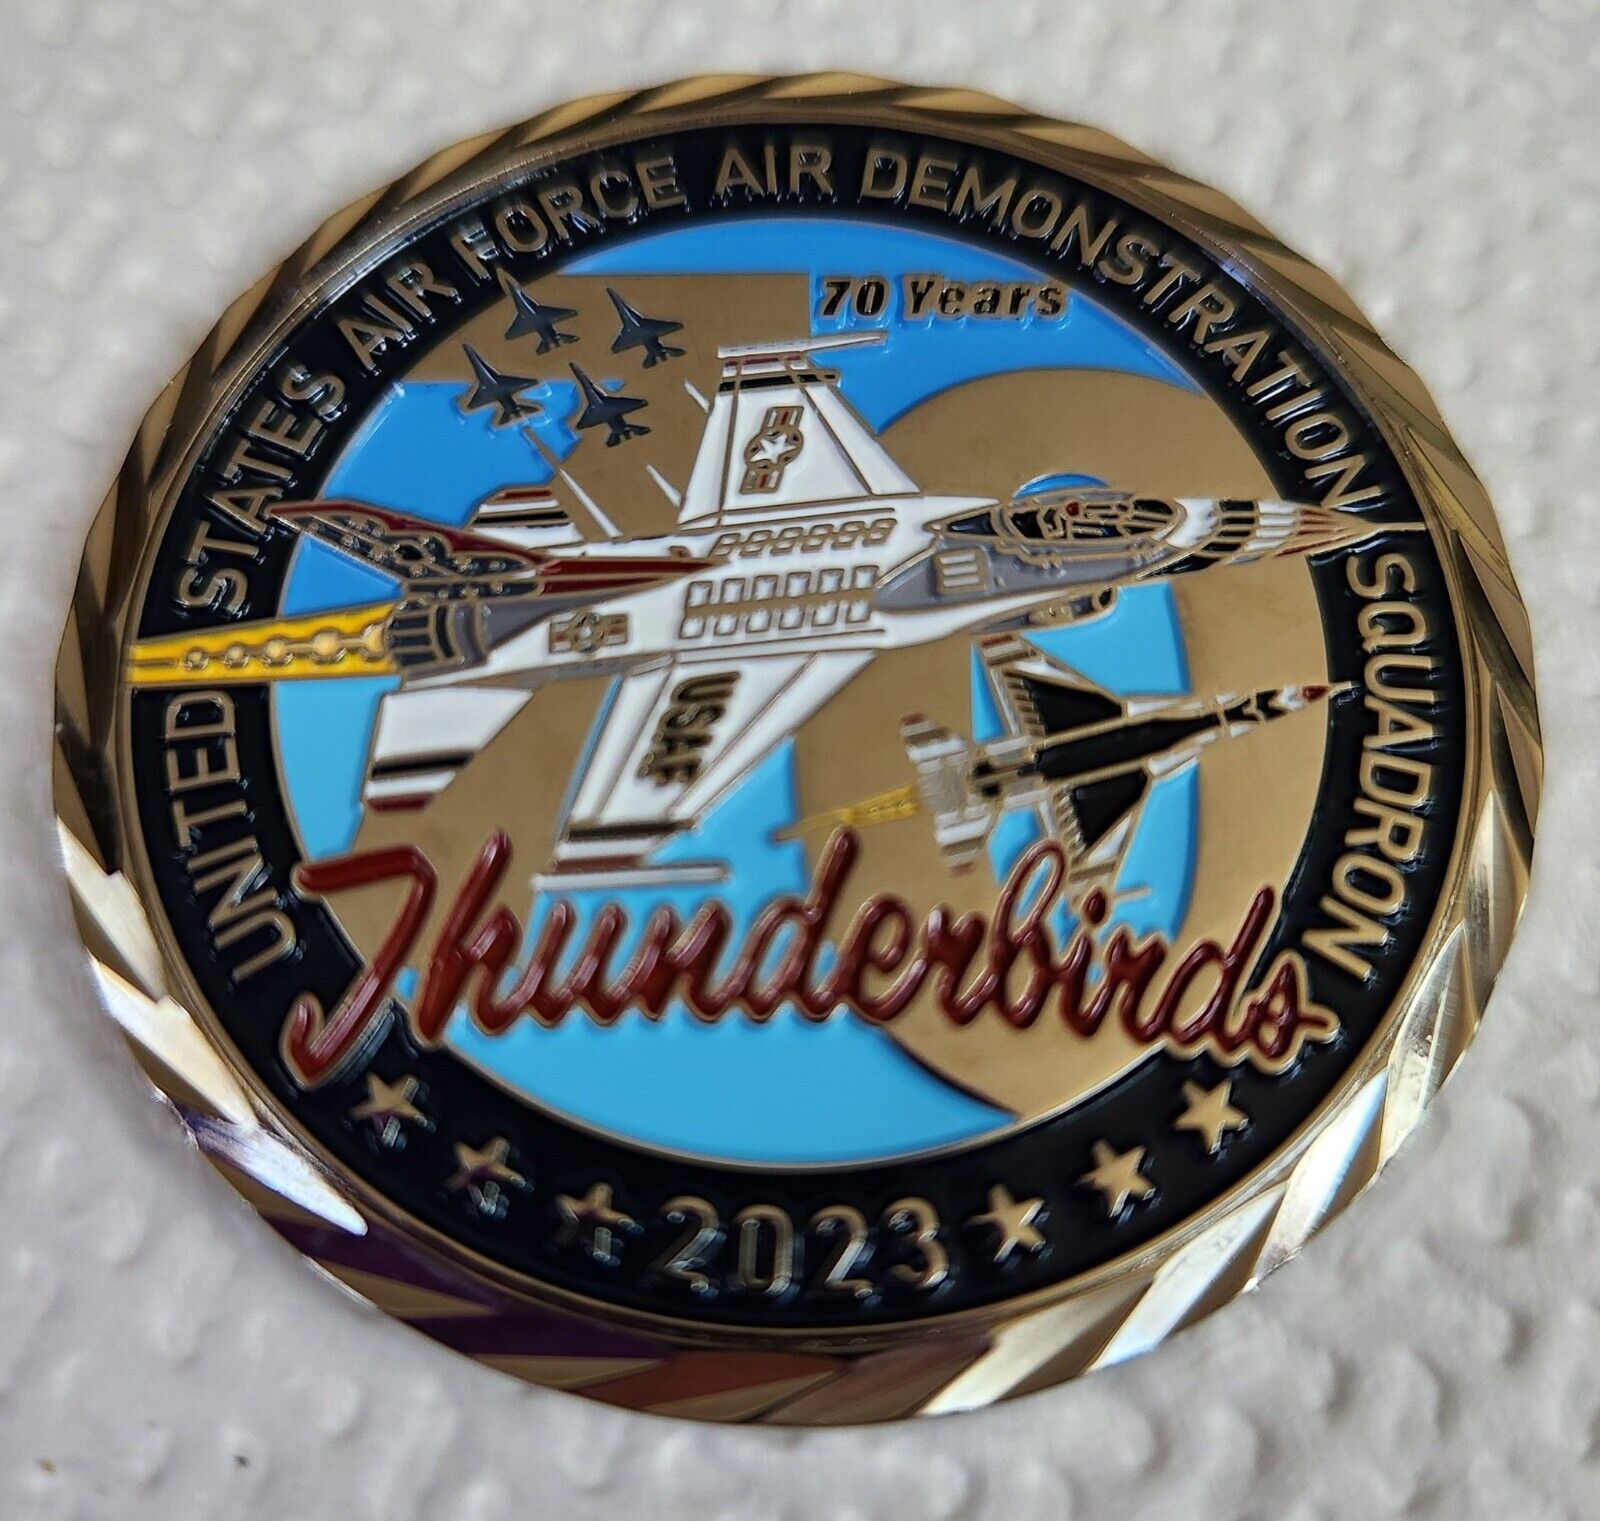 THUNDERBIRDS USAF DEMONSTRATION SQUADRON CHALLENGE COIN 2023 70 ANNIVERSARY